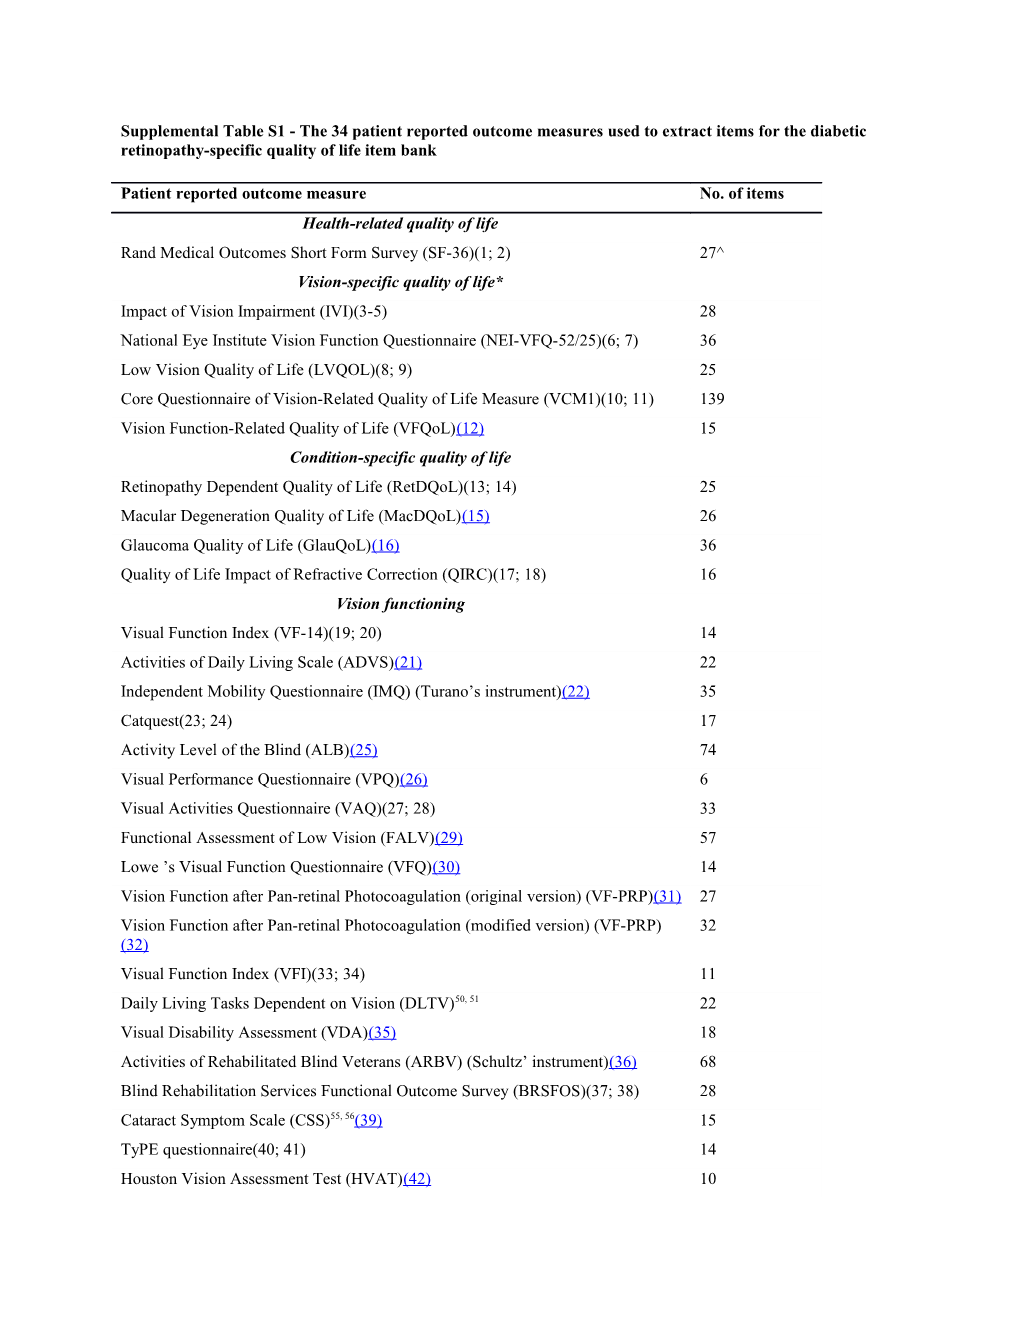 Supplemental Table S1 - the 34 Patient Reported Outcome Measures Used to Extract Items